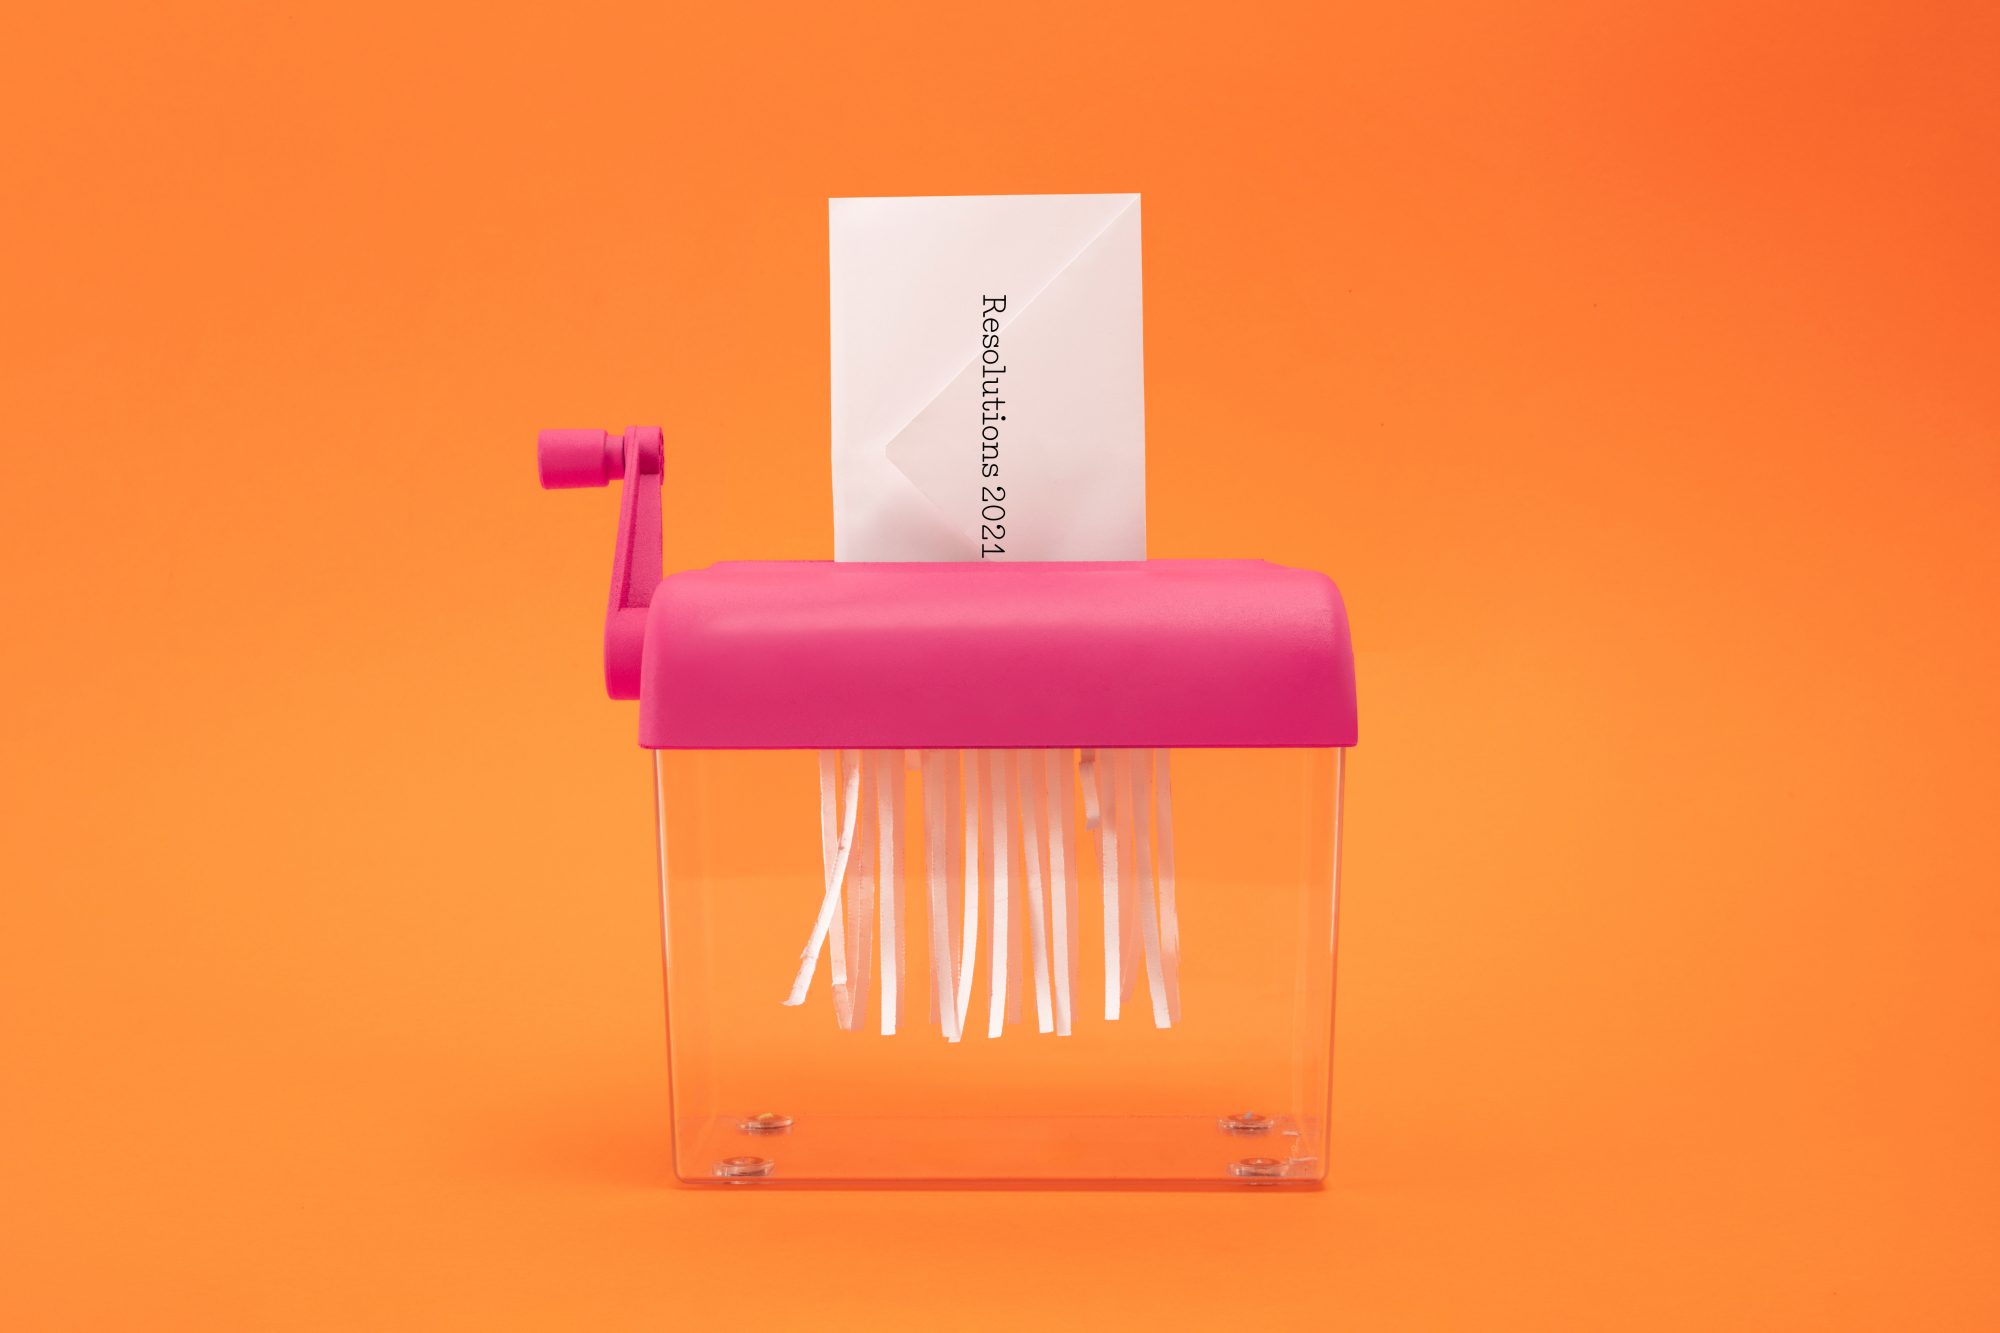 An image of a paper shredder shredding an envelope with New Year's resolutions inside.